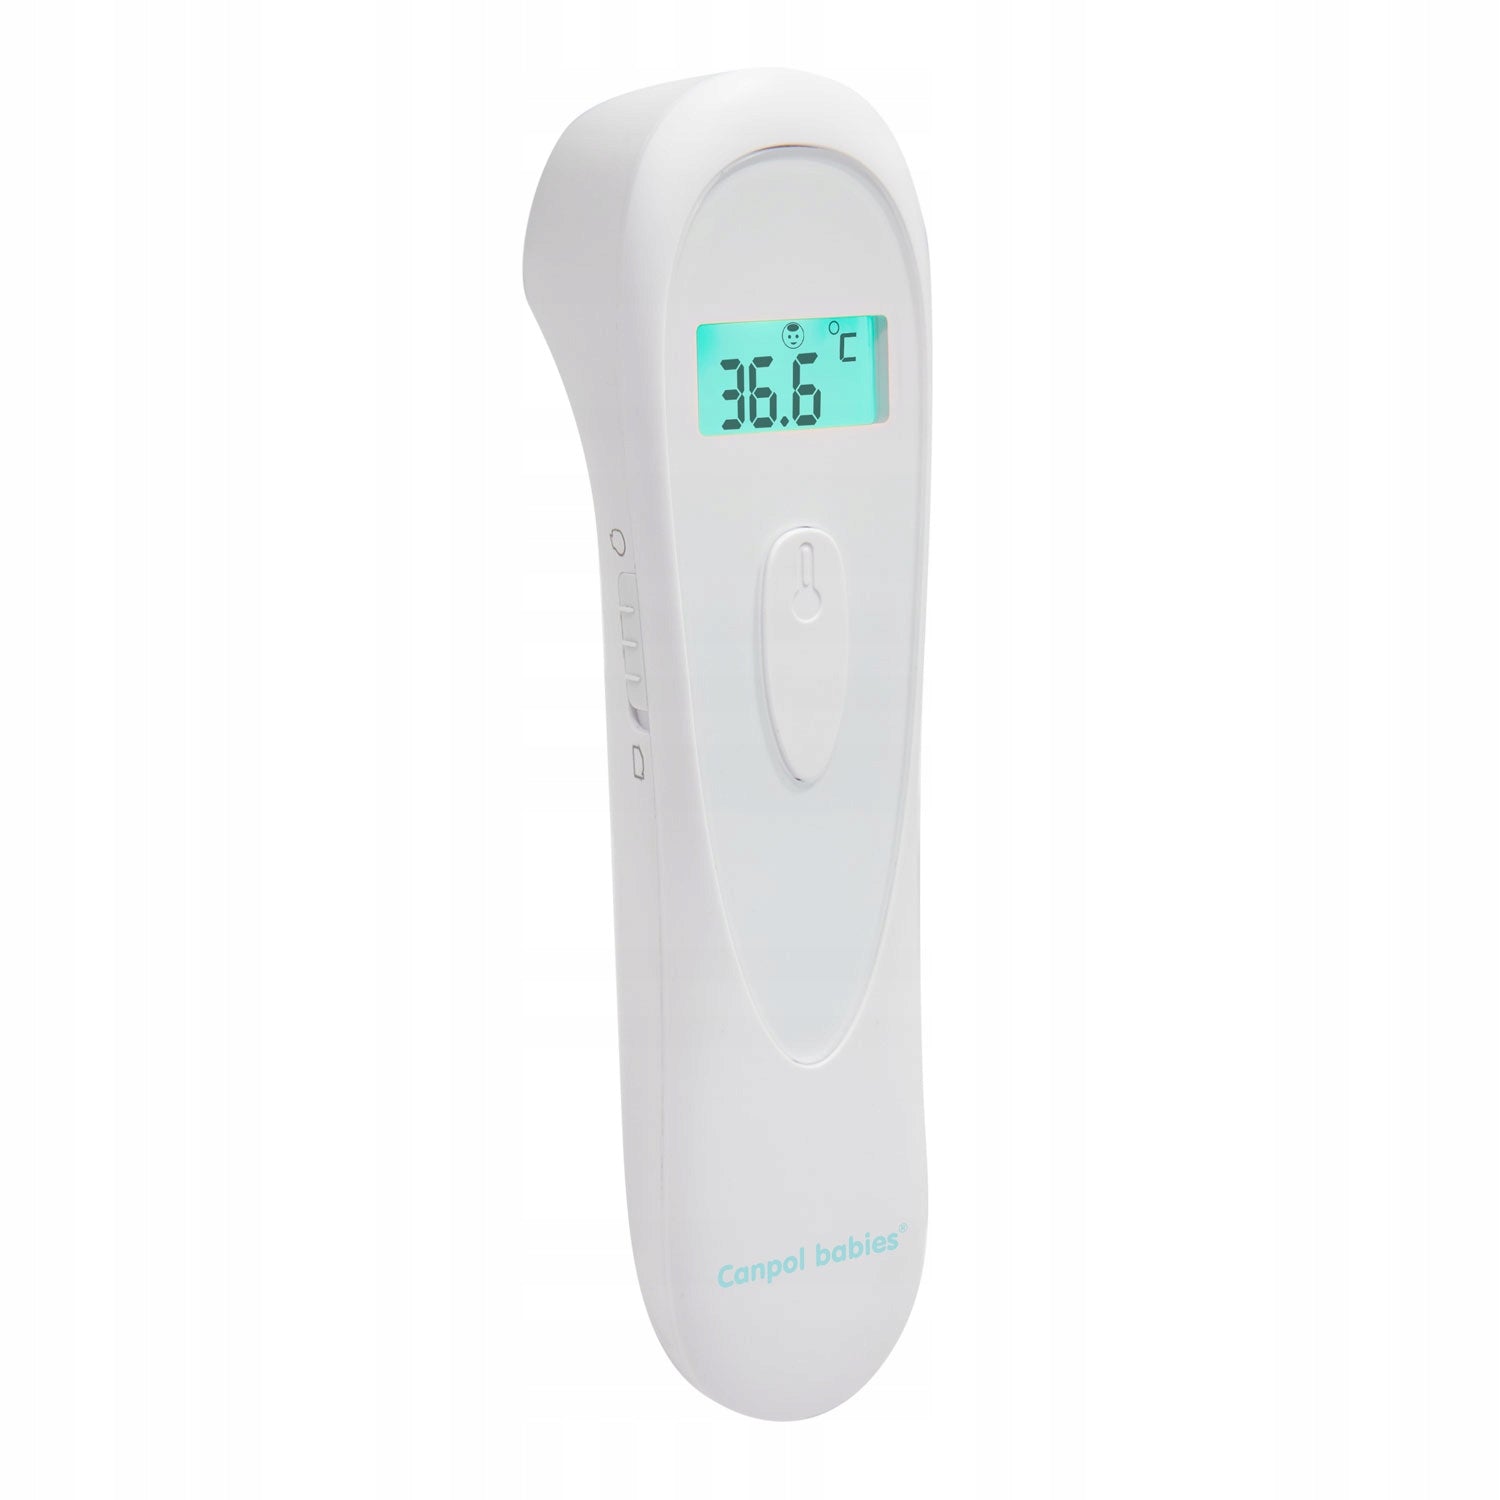 Canpol Babies: EasyStart non-contact infrared thermometer